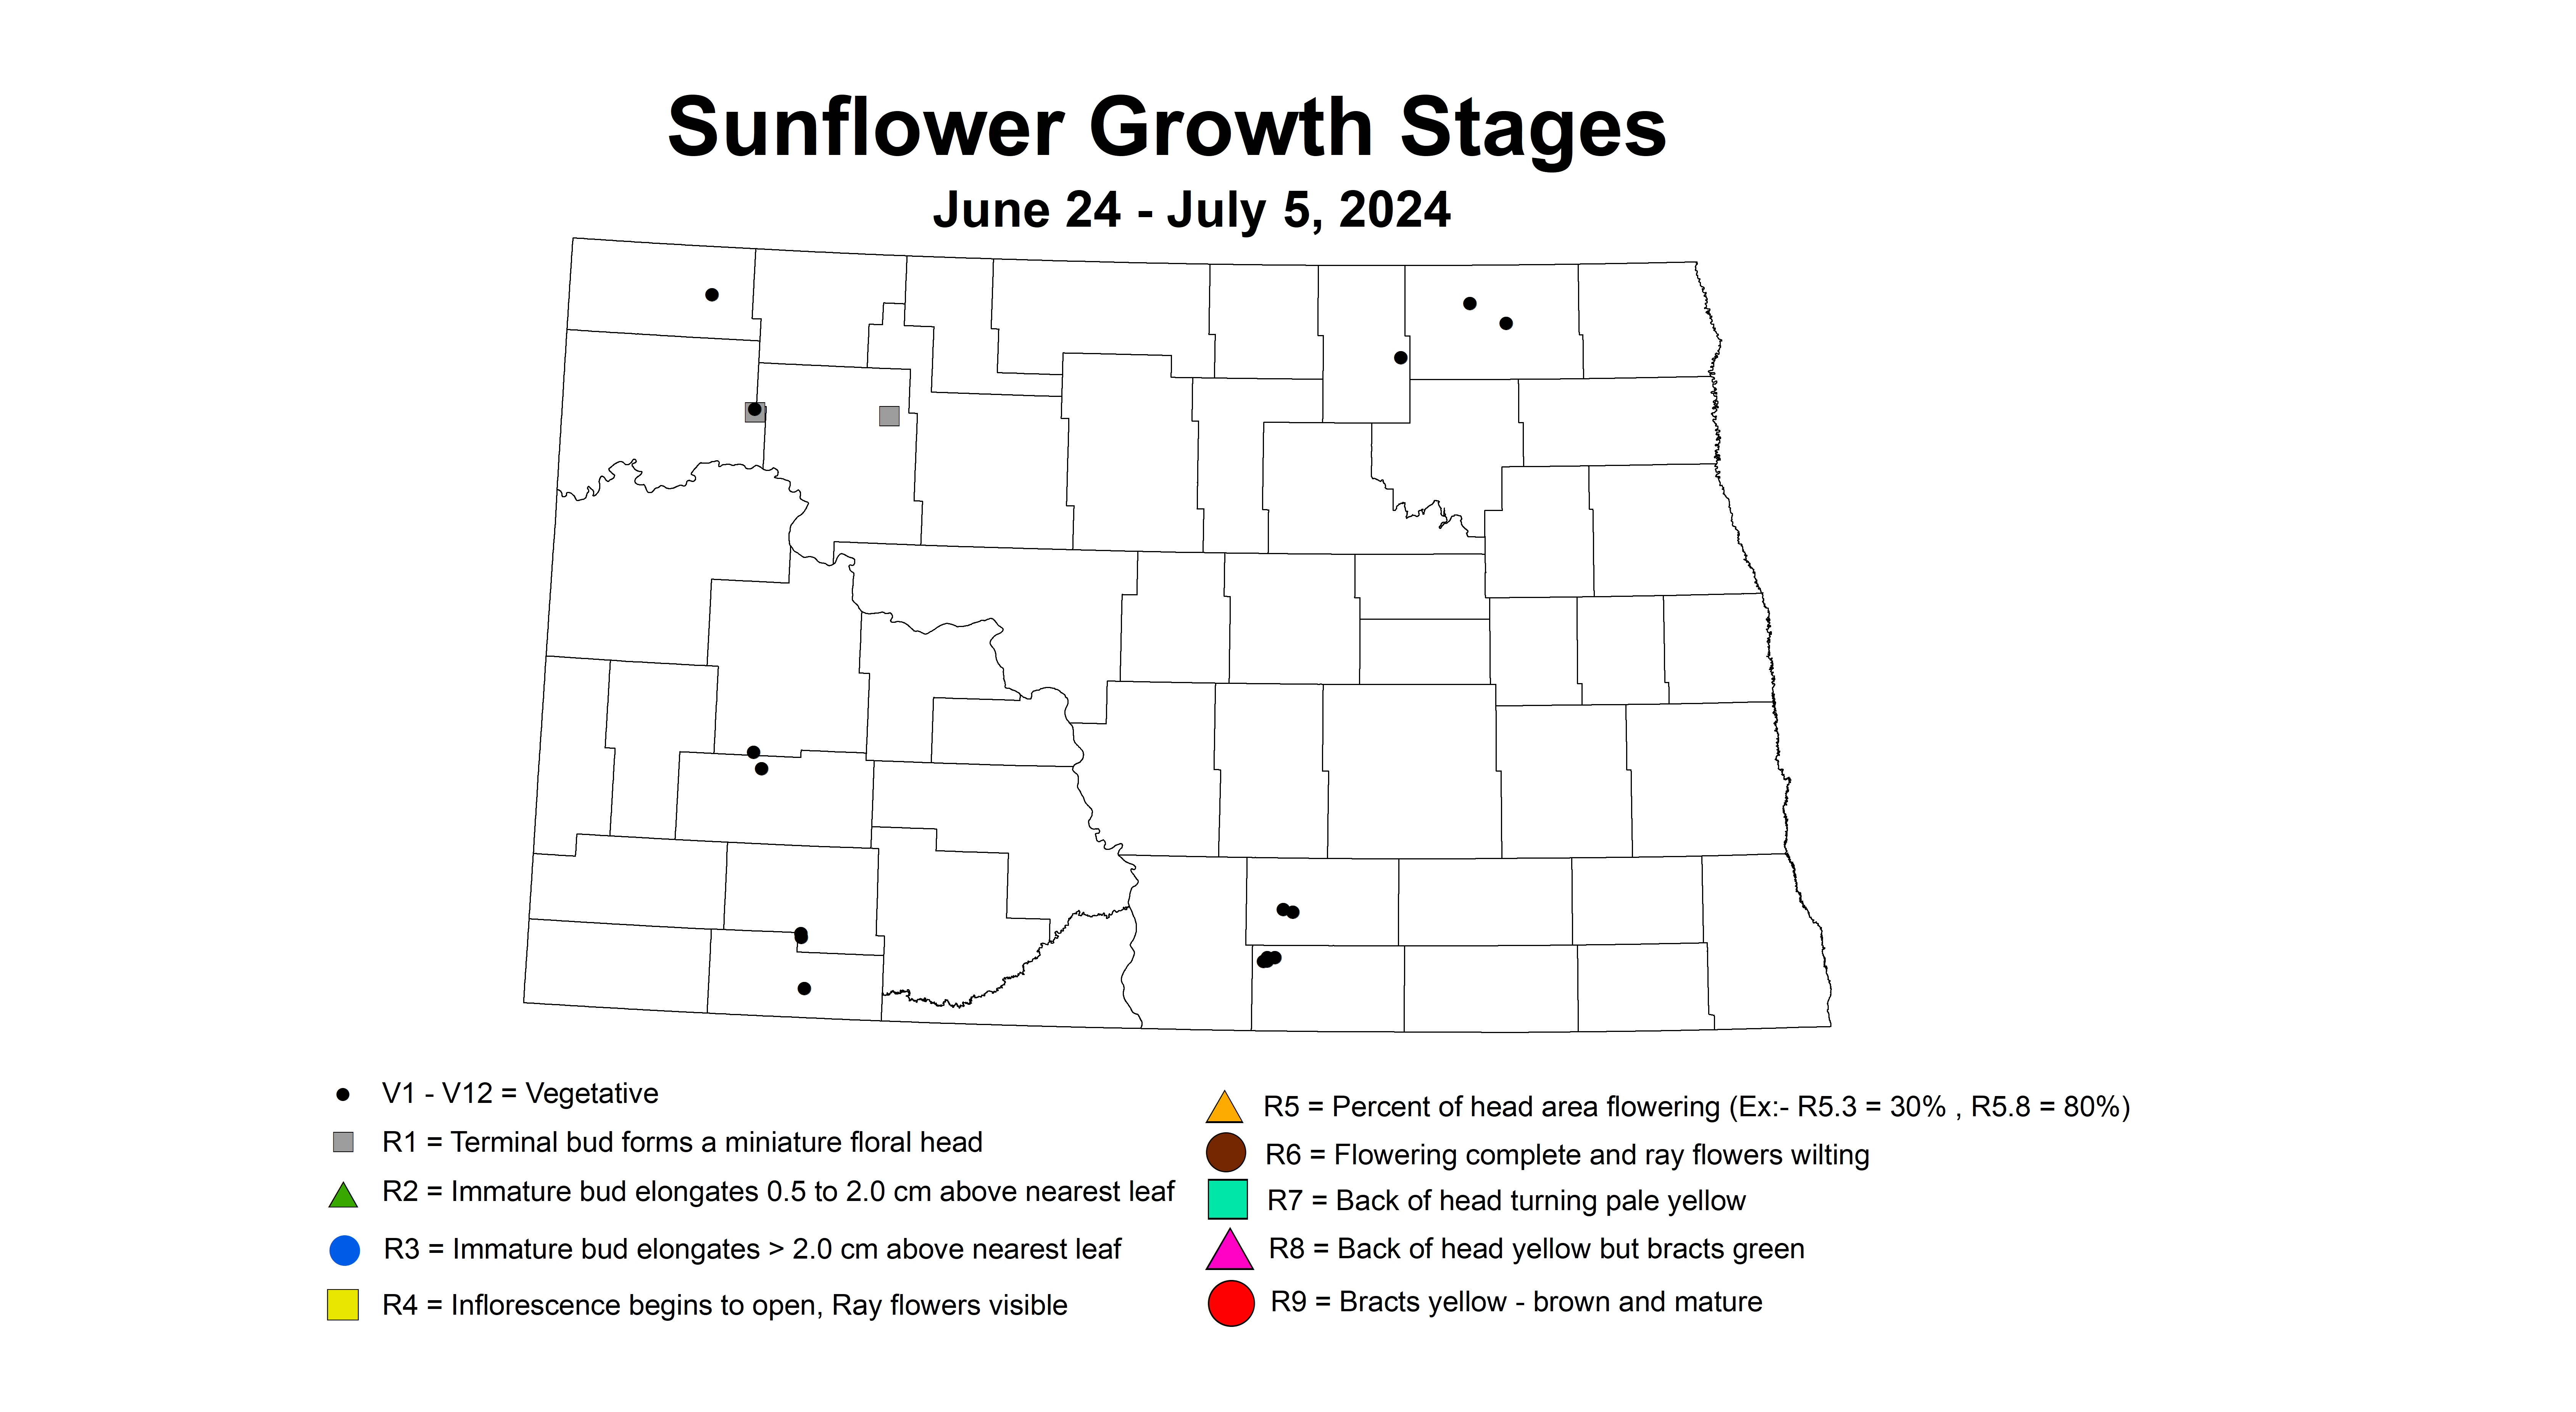 sunflower growth stages June 24 to July 5 2024